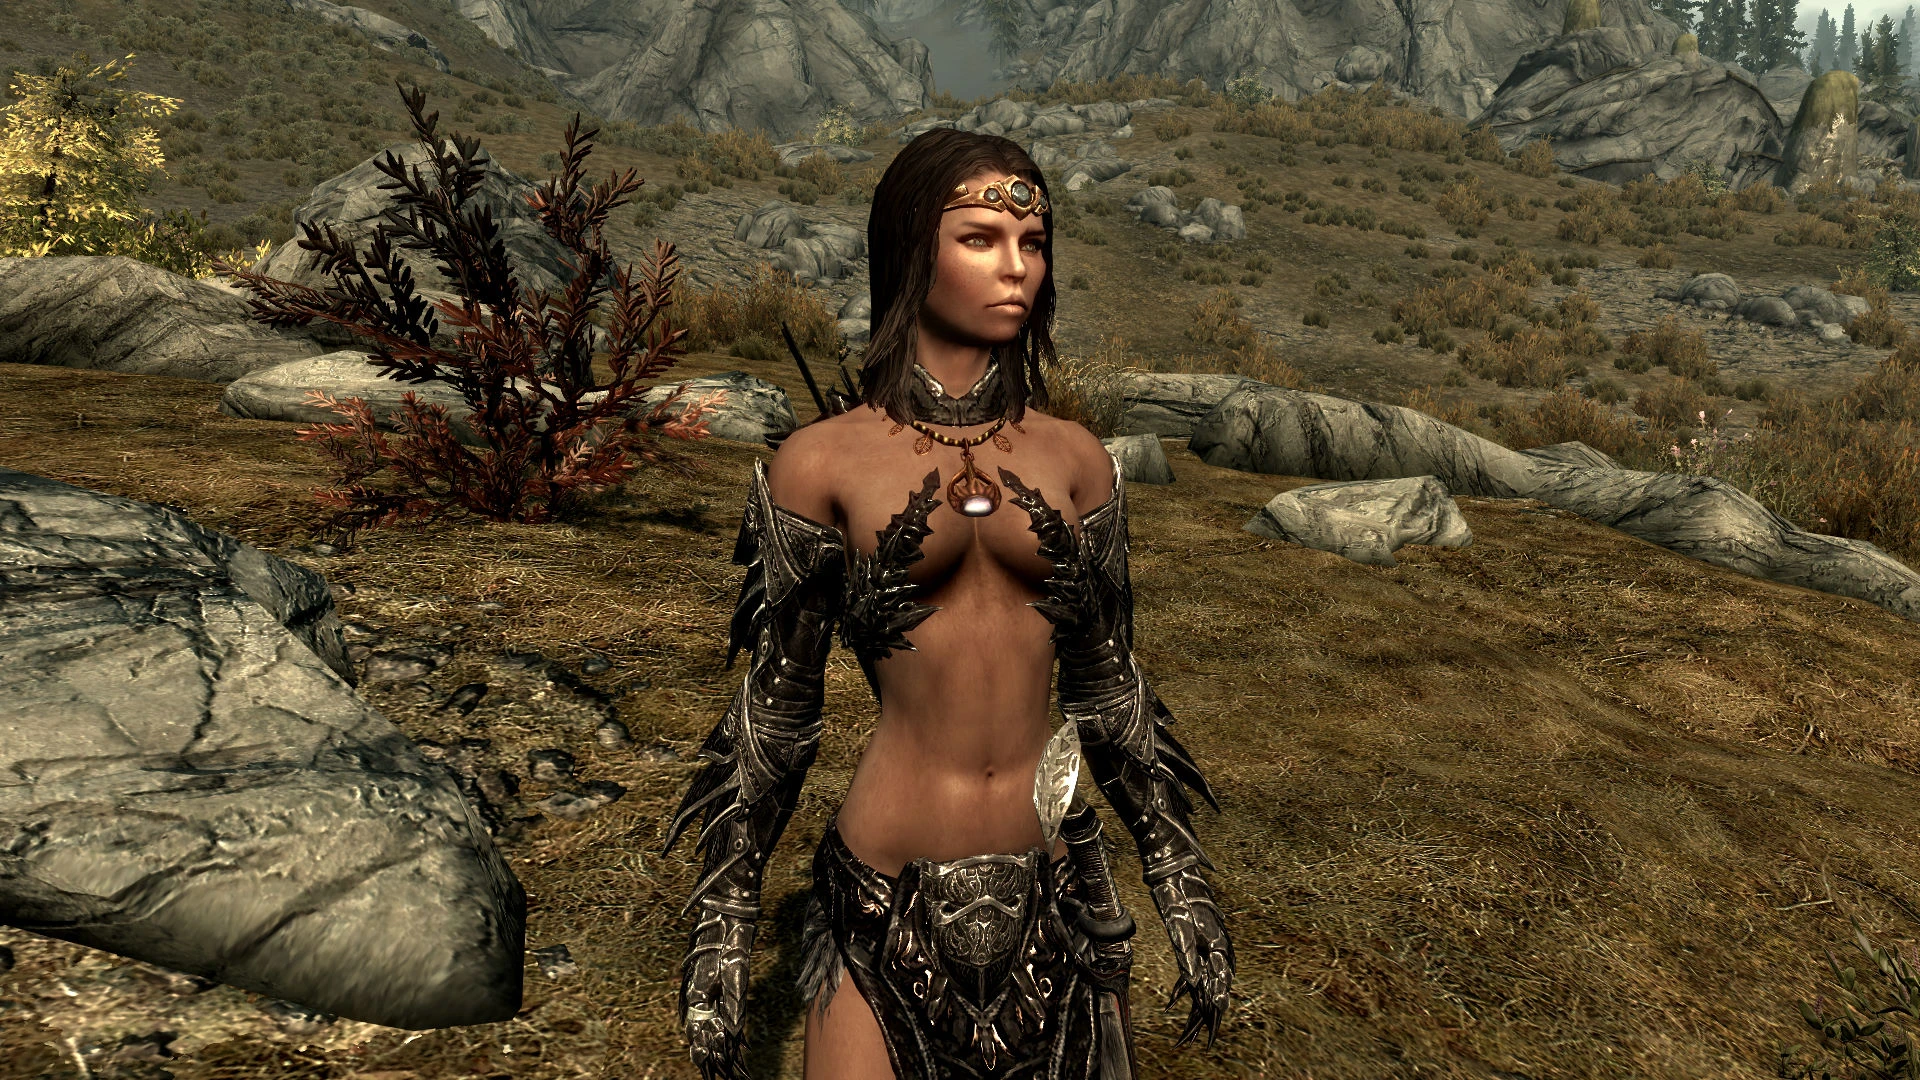 What S Armor Is This From Request And Find Skyrim Adult